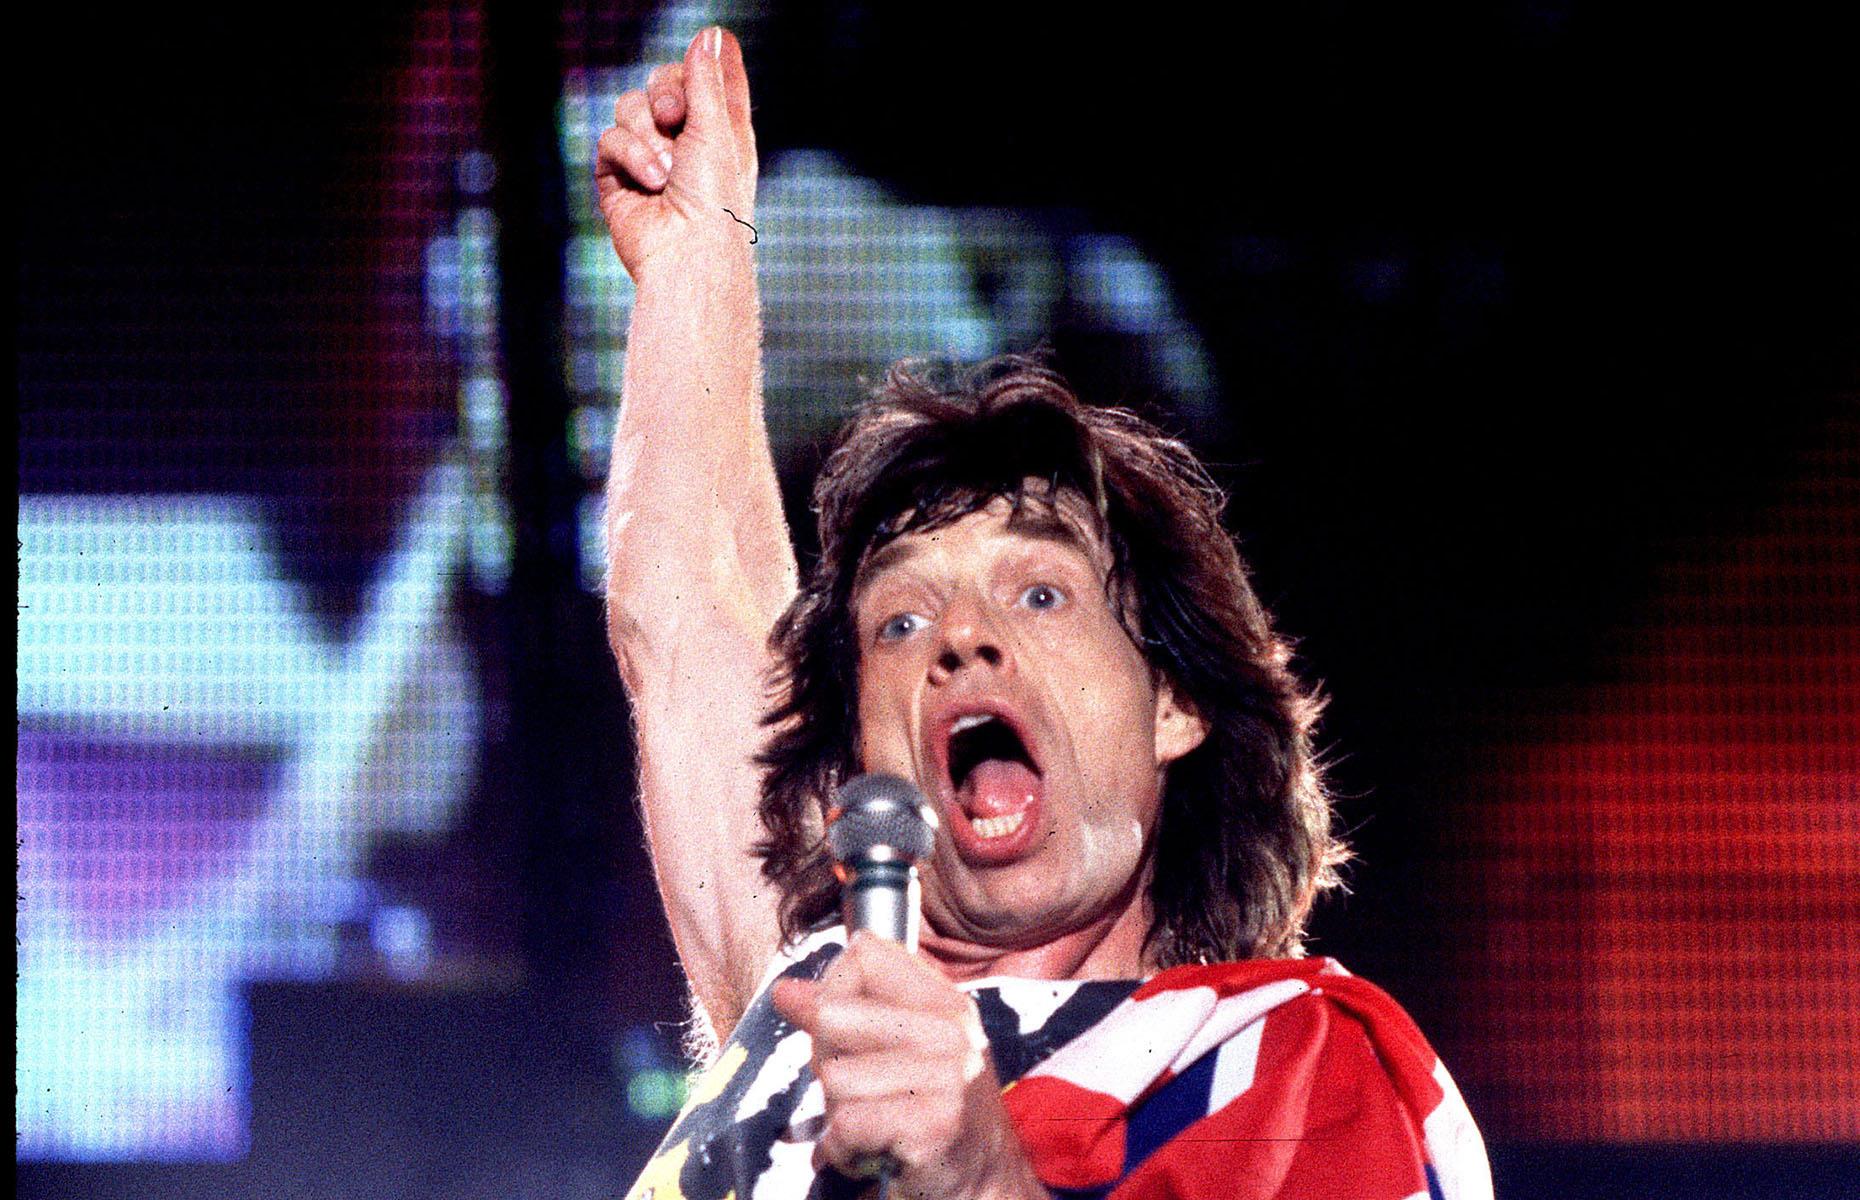 <p>The Rolling Stones performed for more than six million fans between 1994 and 1995 on their <em>Voodoo Lounge Tour, </em>during which Mick Jagger and co. wowed audiences across six continents, playing 134 shows in total. The tour grossed $320 million, or $665 million in today's money.</p>  <p>At the time, it shattered records, swiftly becoming the highest-grossing concert tour in history and cementing the band's legendary status as touring titans.</p>